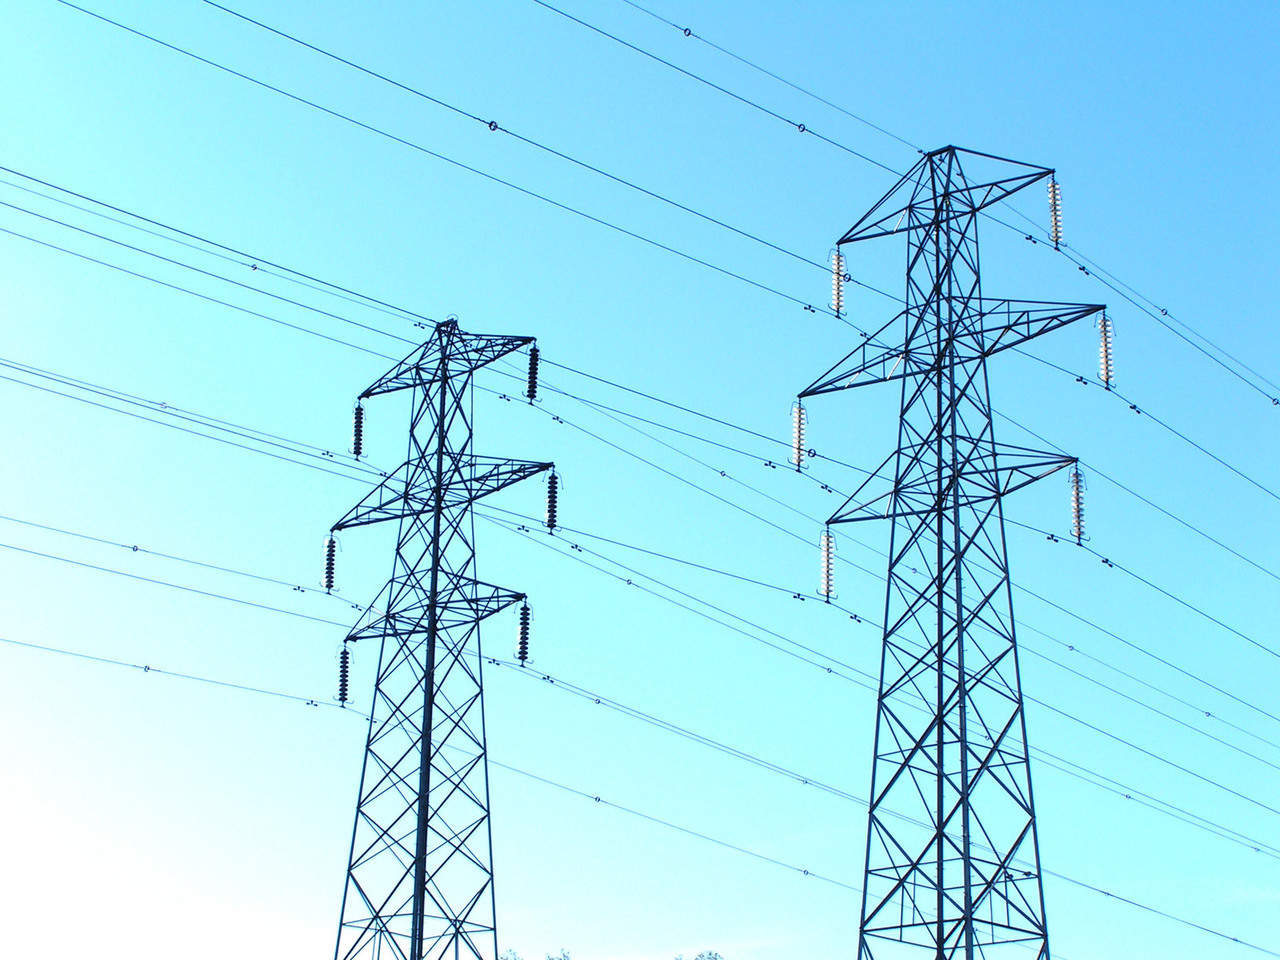 World Bank lends $250m to support electricity distribution sector reforms in Rajasthan, India